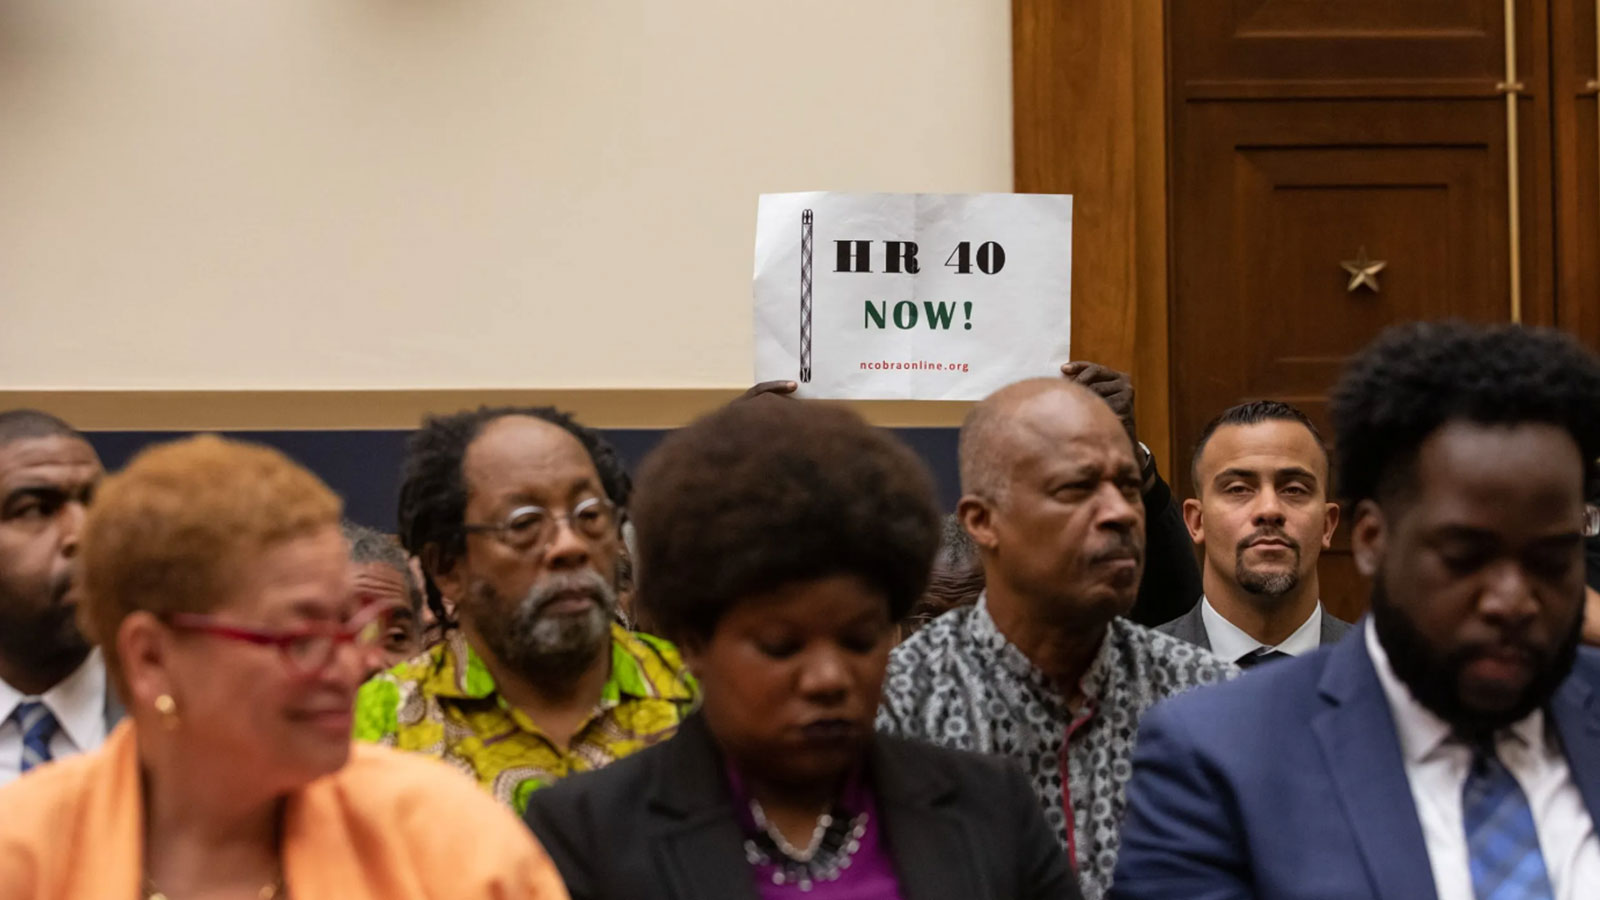 An attendee holds up a sign in support of HR 40, during the hearing on reparations for the descendants of slaves before the House Judiciary Subcommittee on the Constitution, Civil Rights and Civil Liberties, on Capitol Hill in Washington, D.C., on June 19, 2019. (